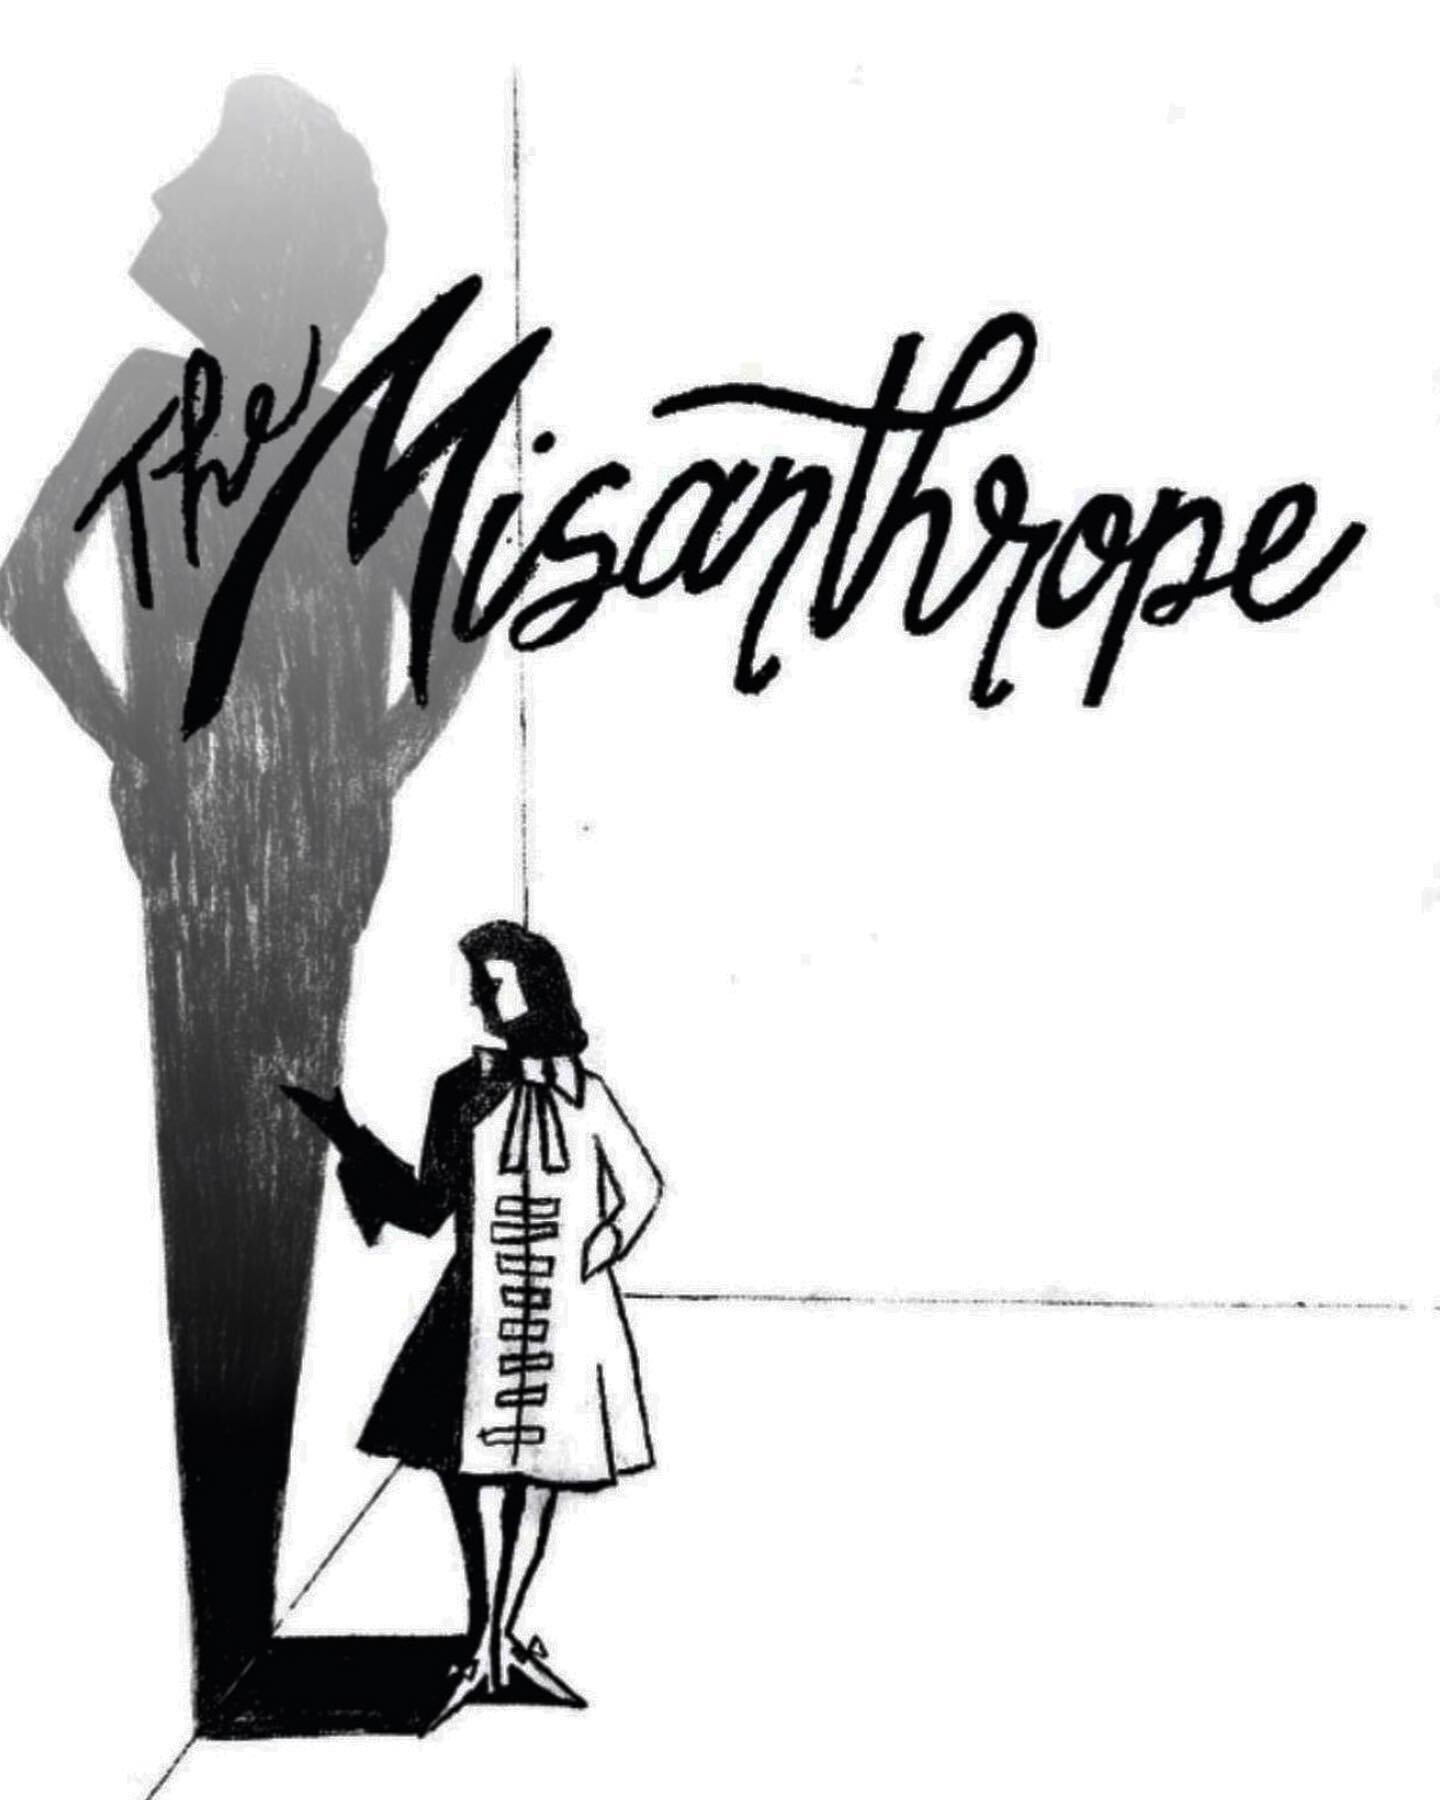 Build for The Misanthrope officially started this week! This is my scenic design thesis show, so it&rsquo;s a really big part of my experience in grad school. Opens in November, the weekend before thanksgiving. More pictures will be posted as we go t